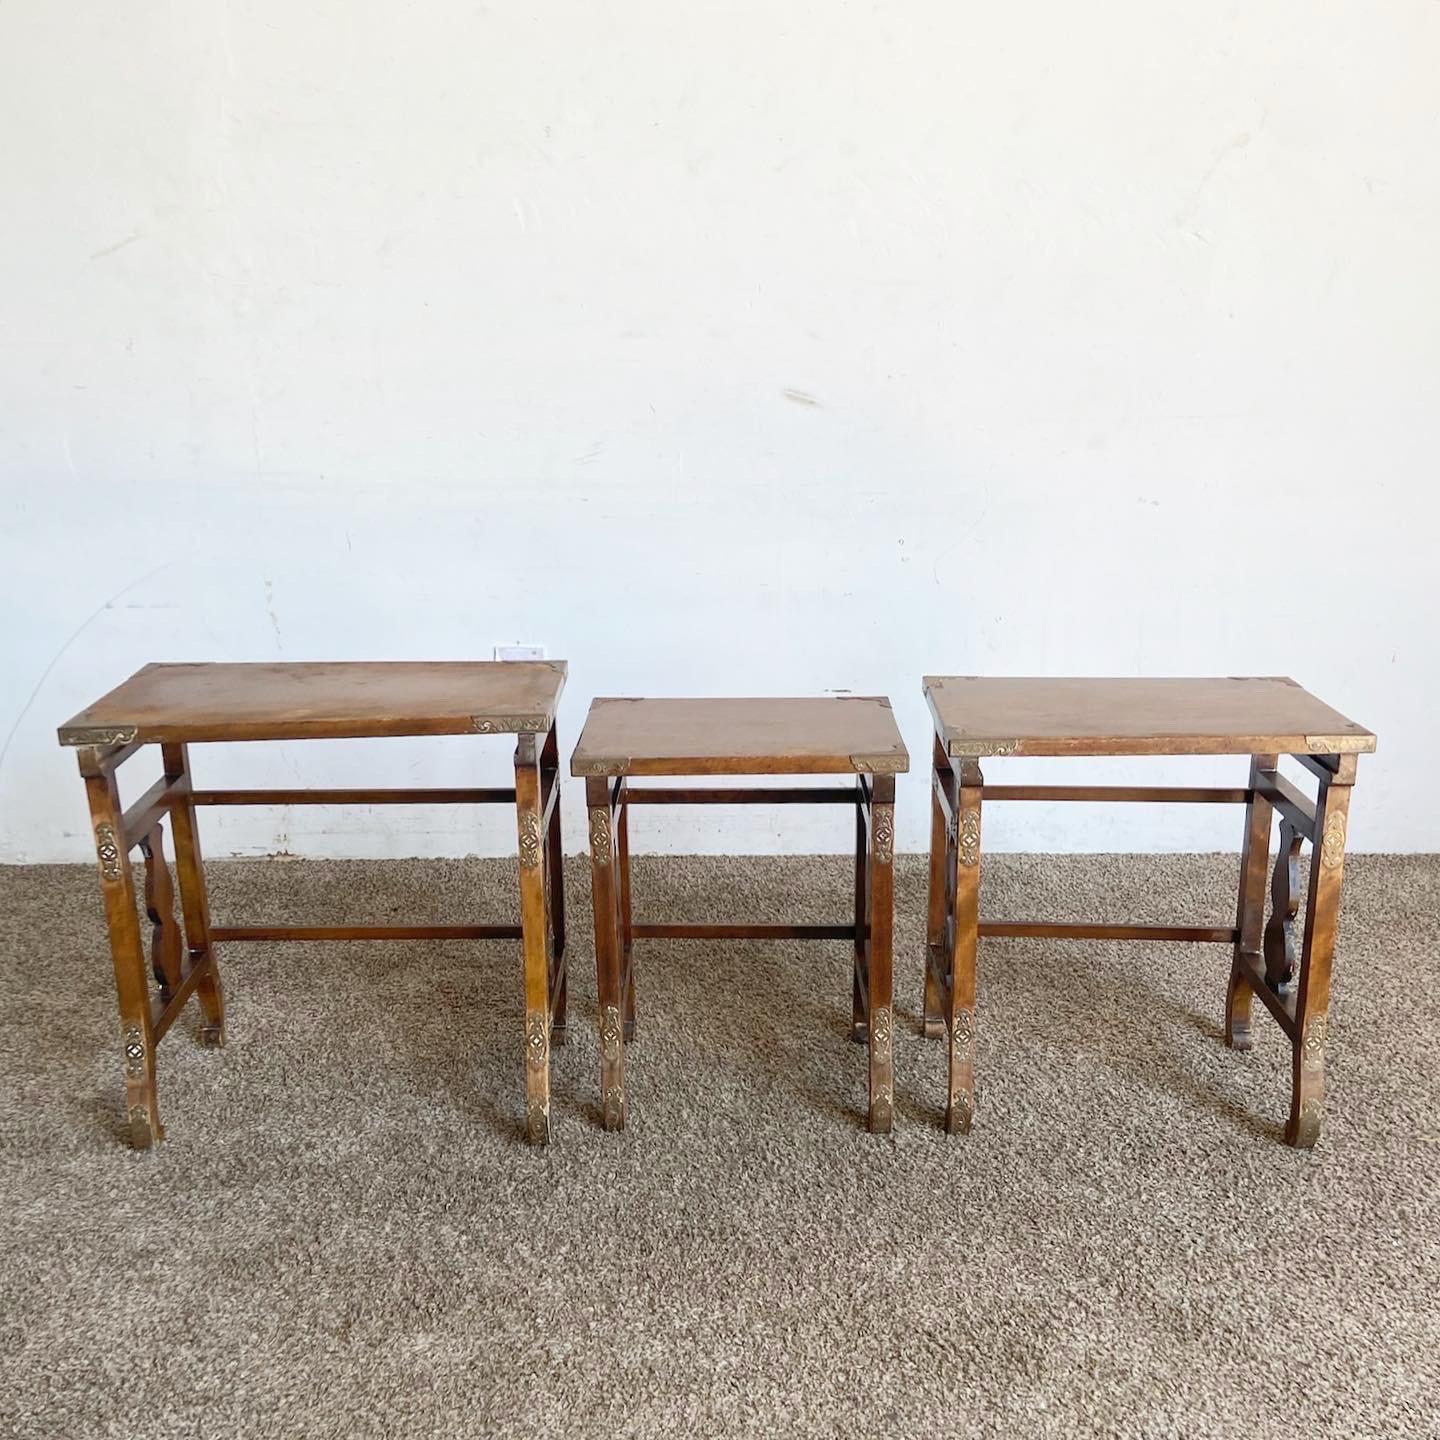 Regency Japanese Wooden Nesting Tables With Brass Accents - Set of 3 For Sale